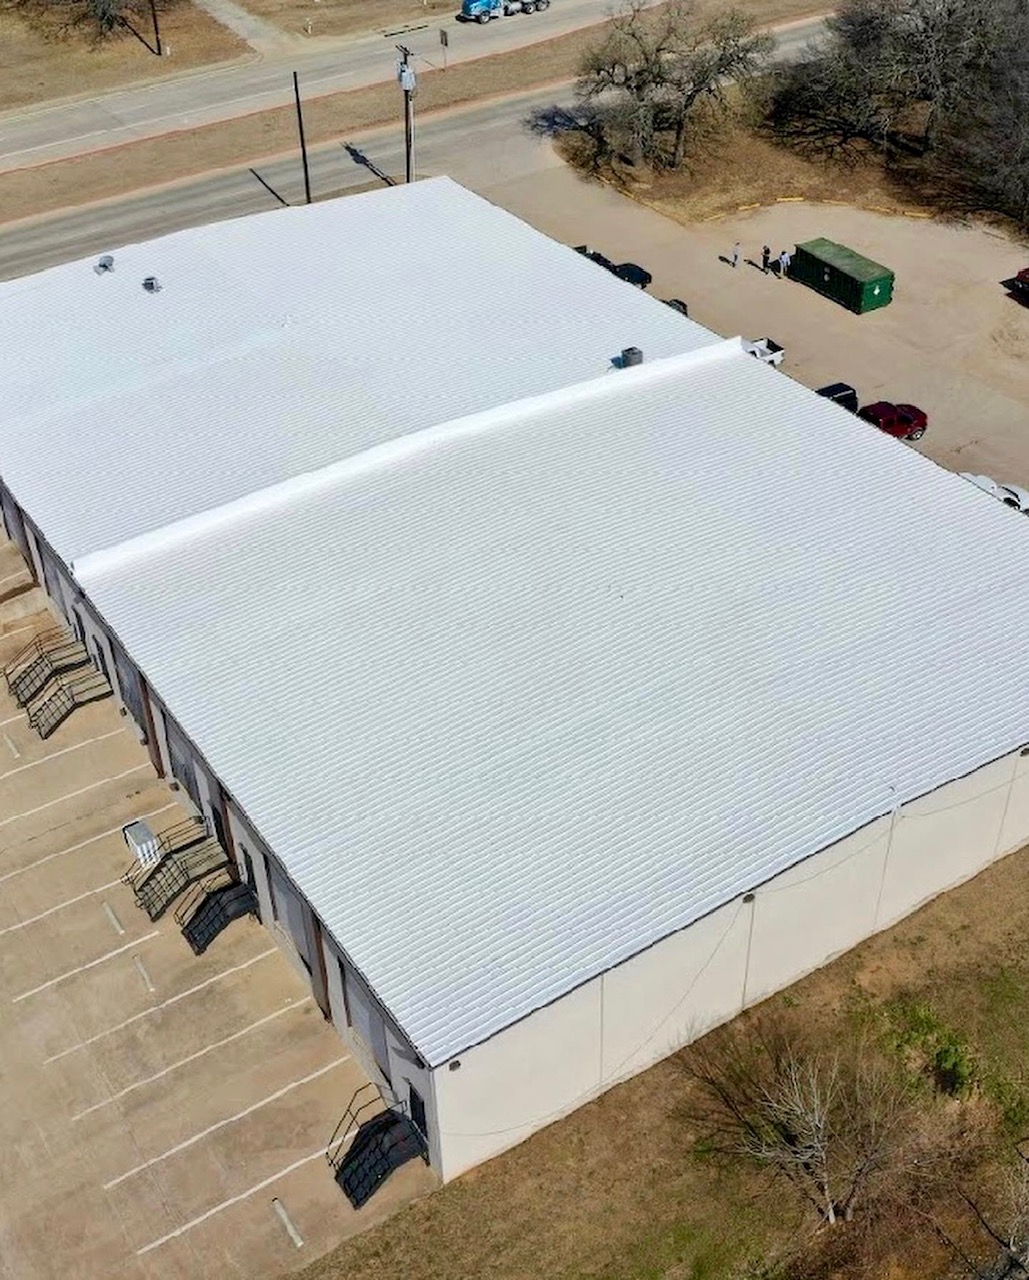 Tropical Roofing Coating by Alpine Roofing Construction in Dallas